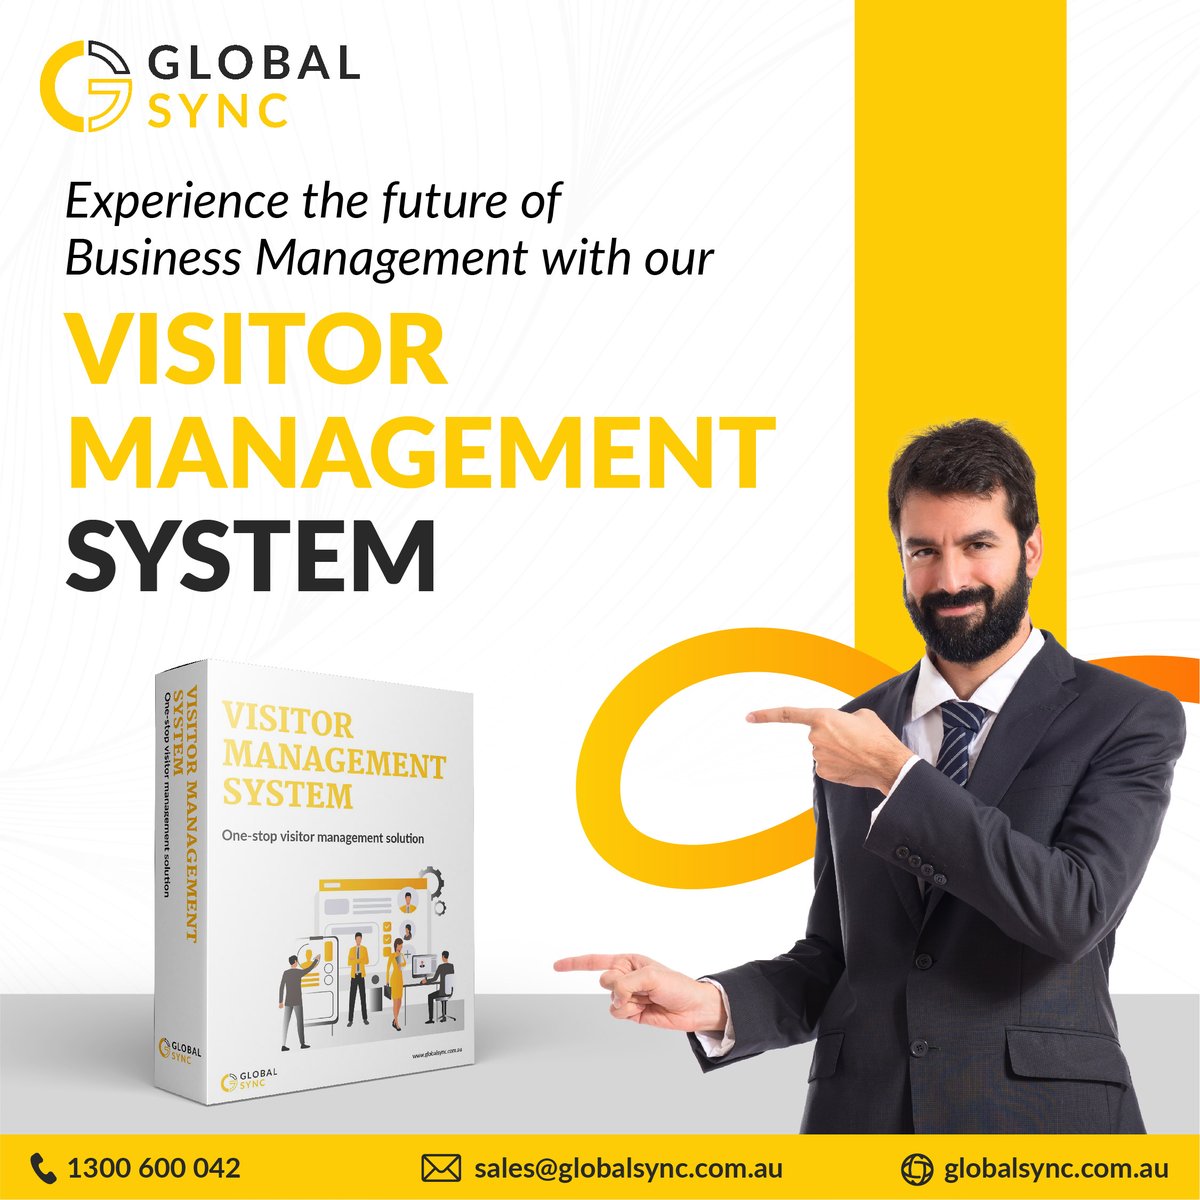 Join the digital revolution with our #VisitorManagementSystem the perfect solution for efficient & secure business management.

Click on the link for Free Signup
𝐅𝐫𝐞𝐞 𝐒𝐢𝐠𝐧 𝐔𝐩: bit.ly/3wopFYK

Or you can directly connect us today at 
+𝟗𝟏 𝟗𝟗𝟏𝟎 𝟔𝟕𝟖 𝟒𝟔𝟐